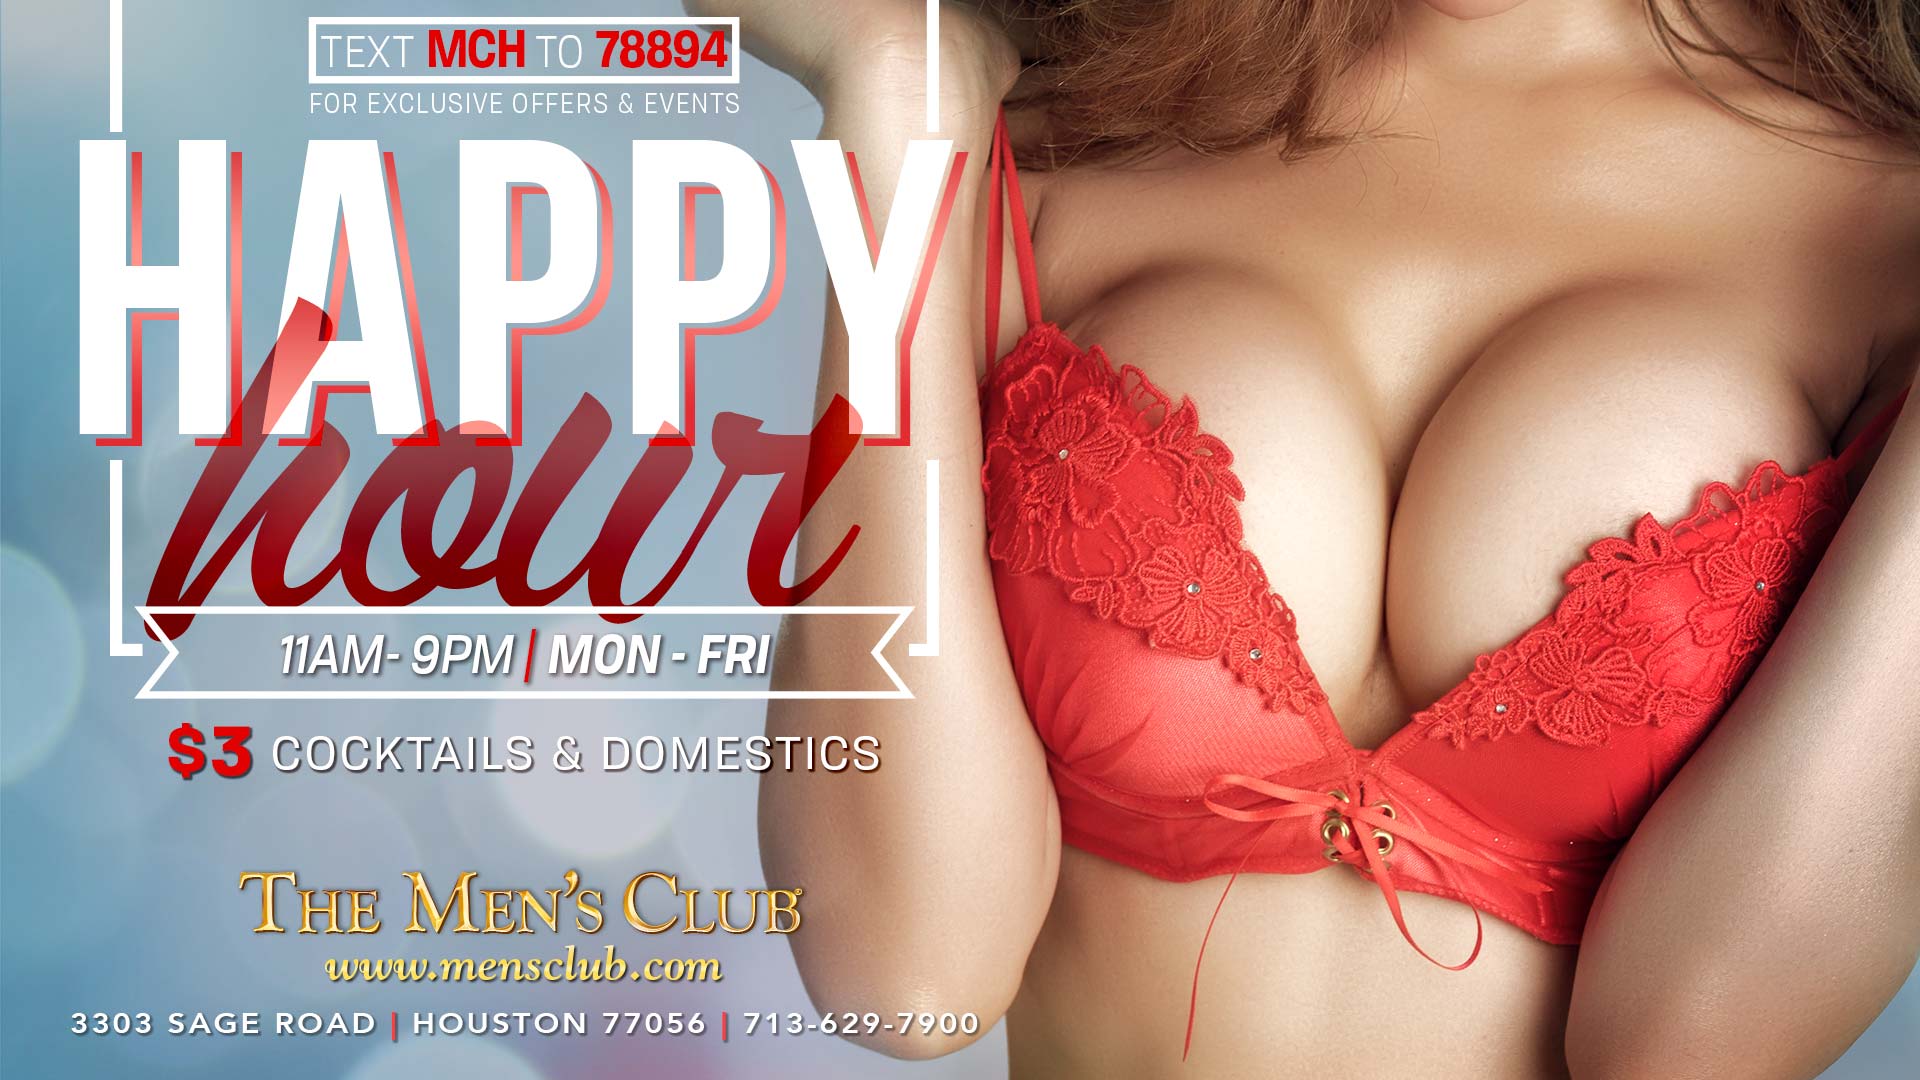 image of sexy woman in tight red bra promoting The Men's Club of Houston's Happy Hour promo